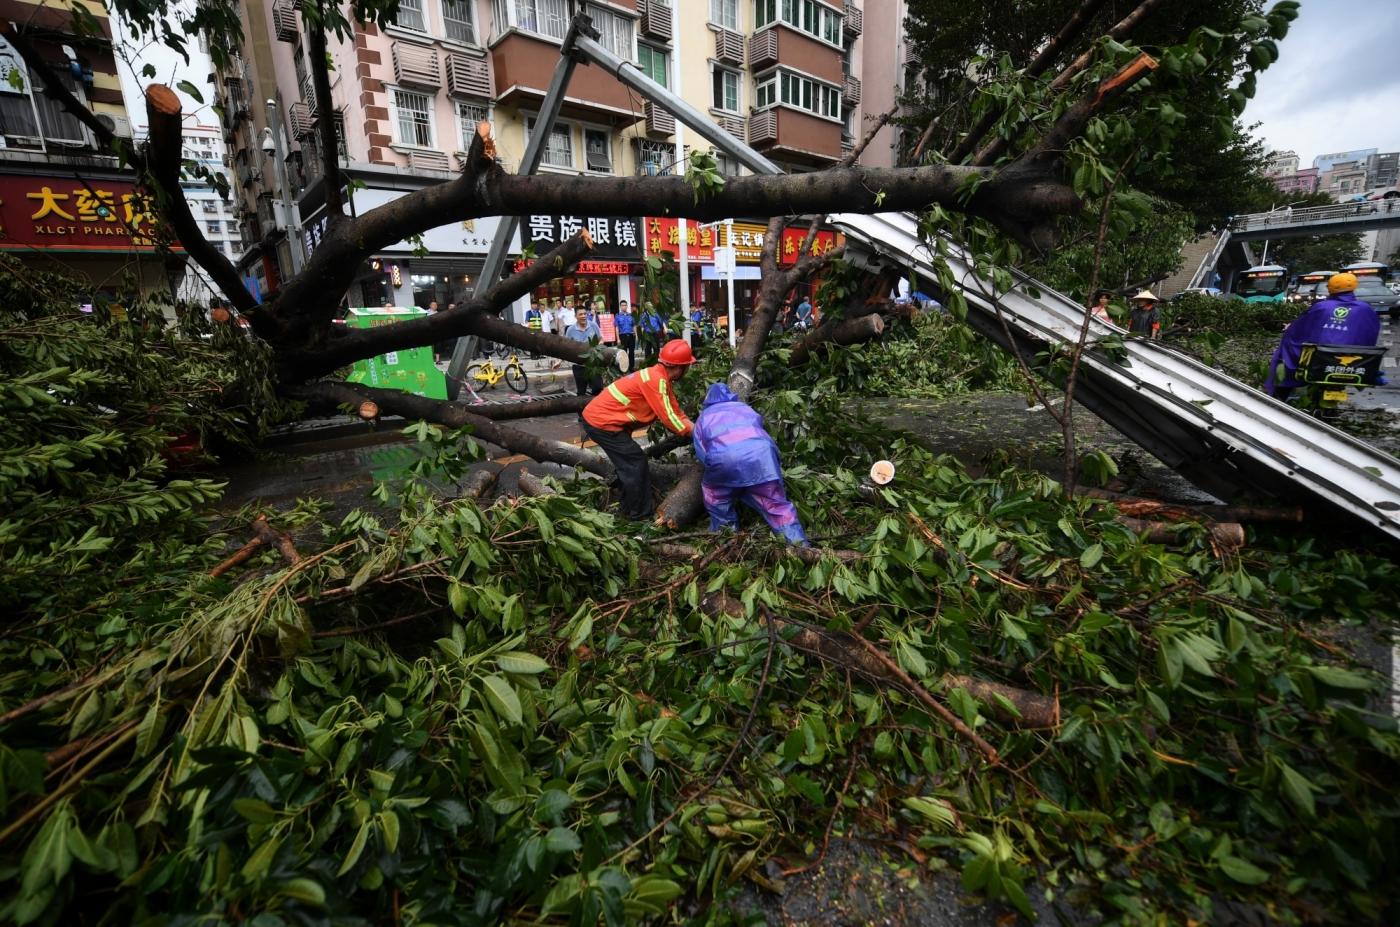 SHENZHEN, Sept. 17, 2018 (Xinhua) -- People clear fallen trees in Futian District of Shenzhen, south China's Guangdong Province, Sept. 17, 2018. Local meteorological authority cancelled the yellow warning against typhoon Monday afternoon. The disaster relief work is underway. (Xinhua/Mao Siqian/IANS) by .